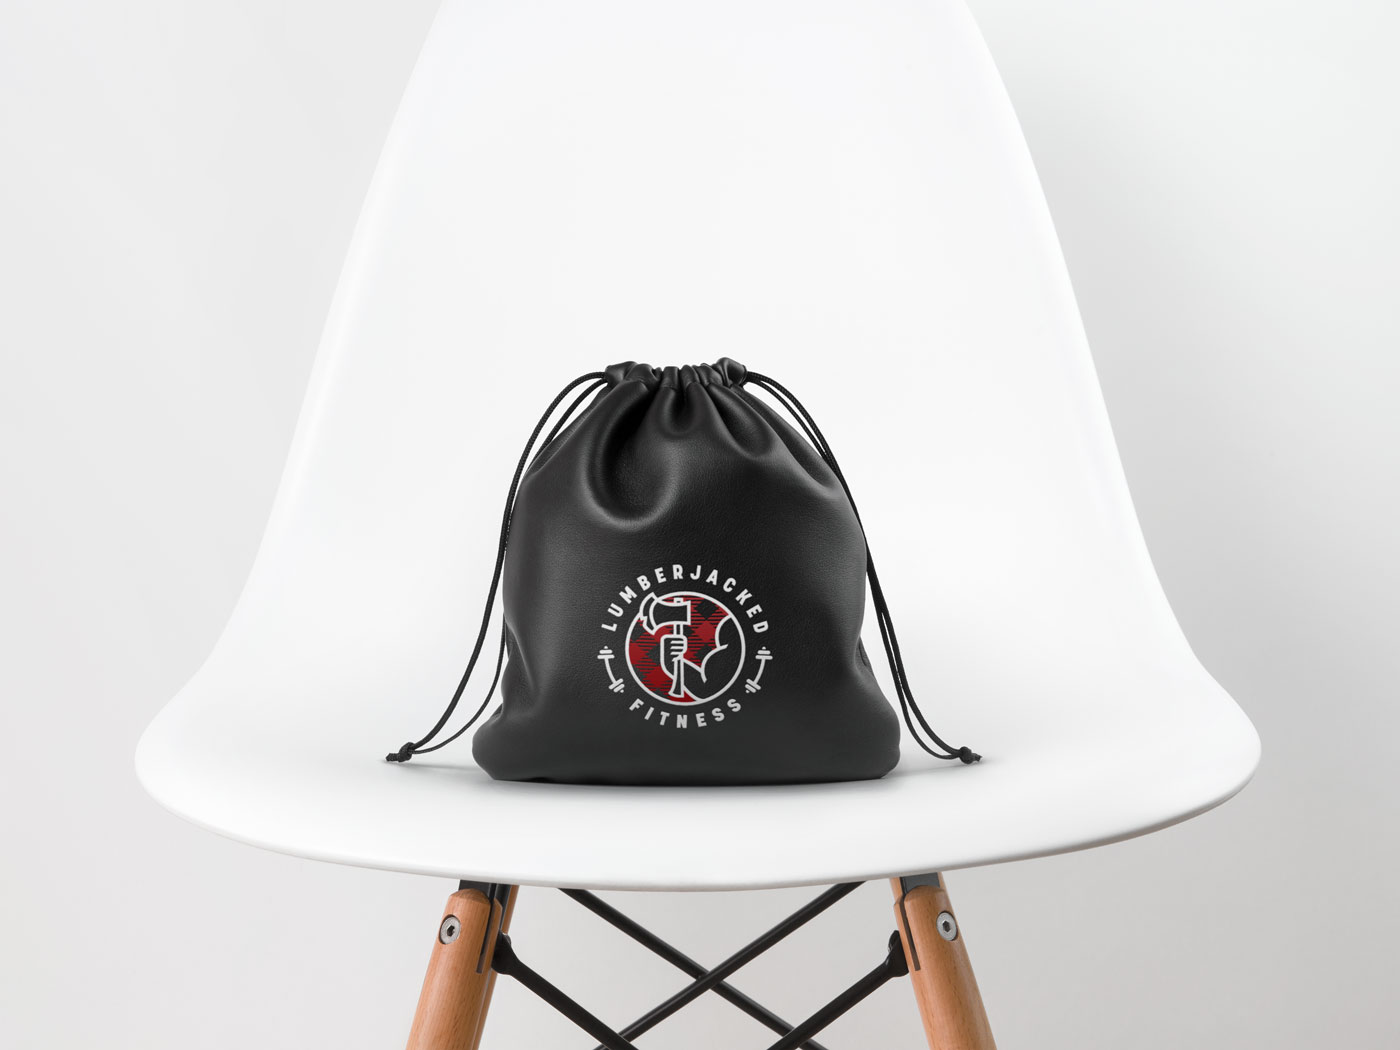 Leather workout bag with Lumberjacked Fitness logo